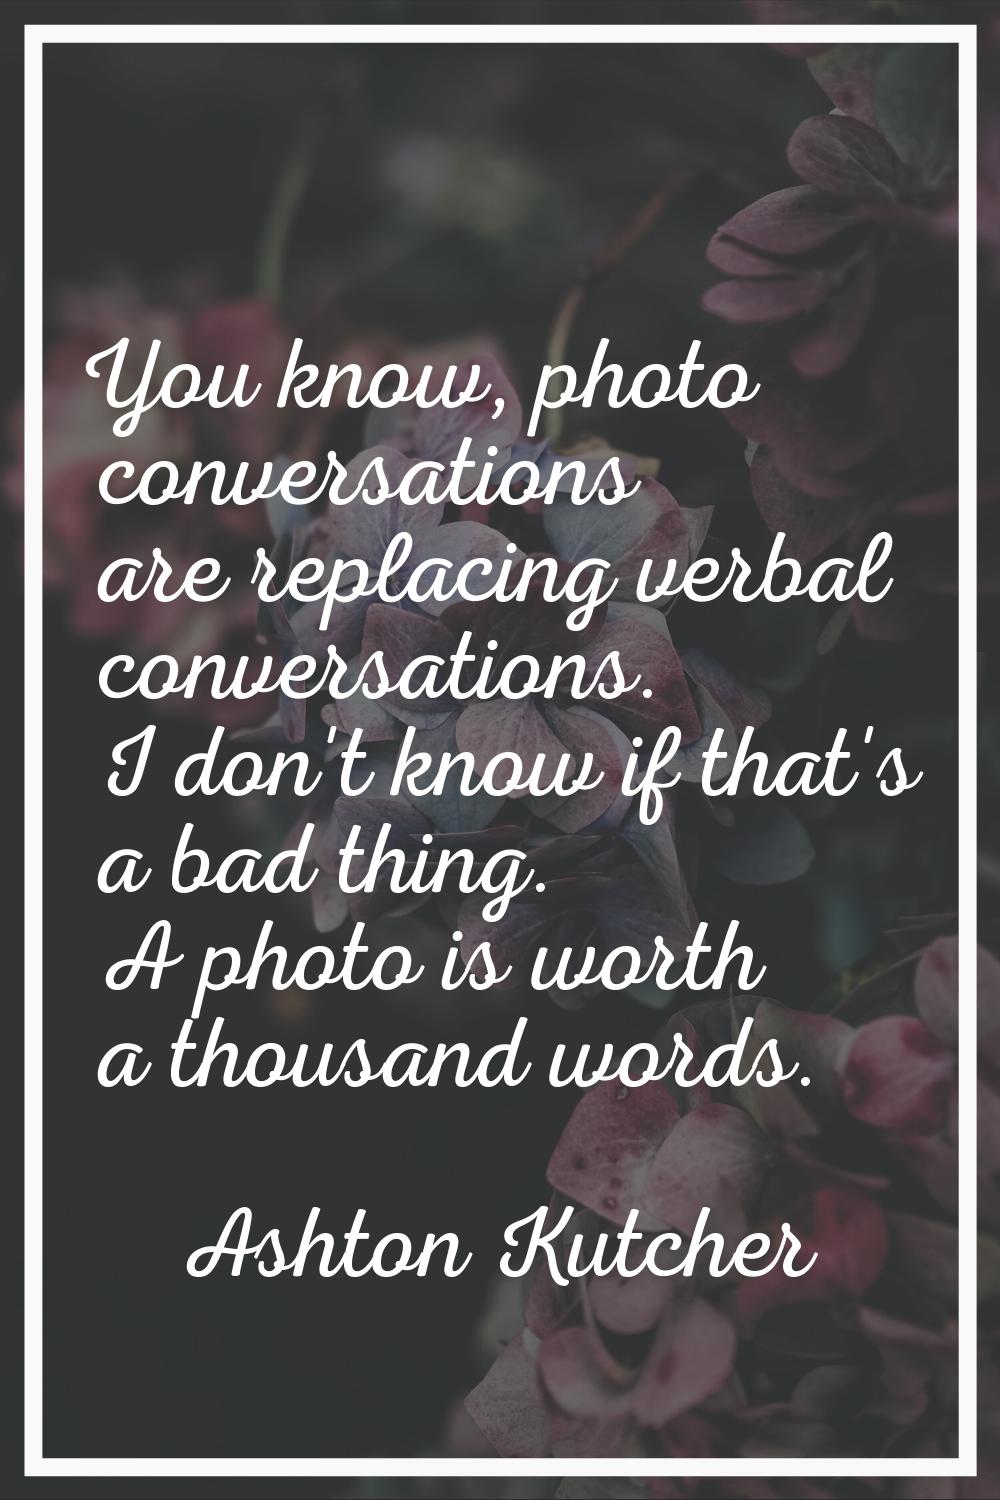 You know, photo conversations are replacing verbal conversations. I don't know if that's a bad thin